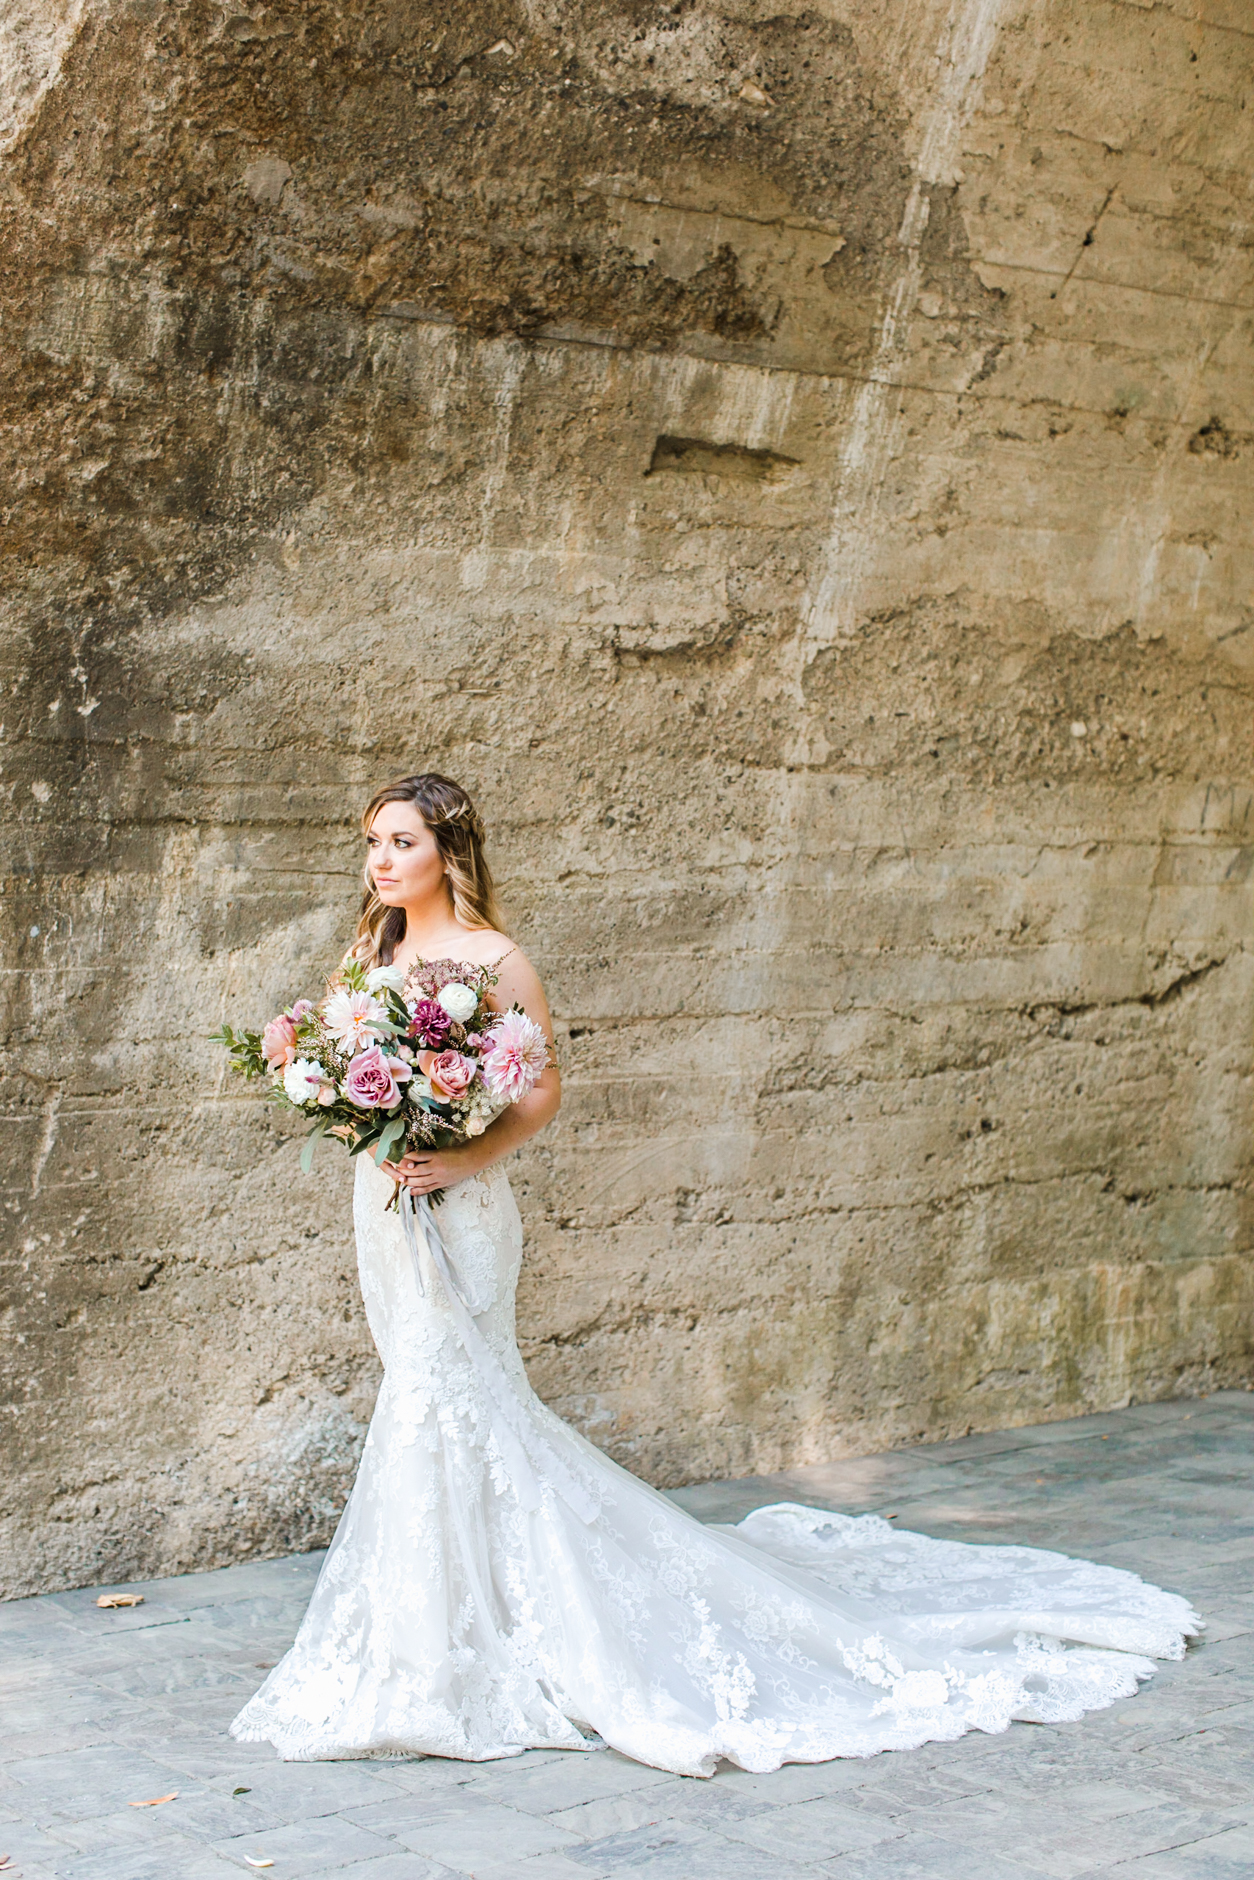 Bride at a Longbridge Wedding at Saratoga Springs by Alice Che Photography